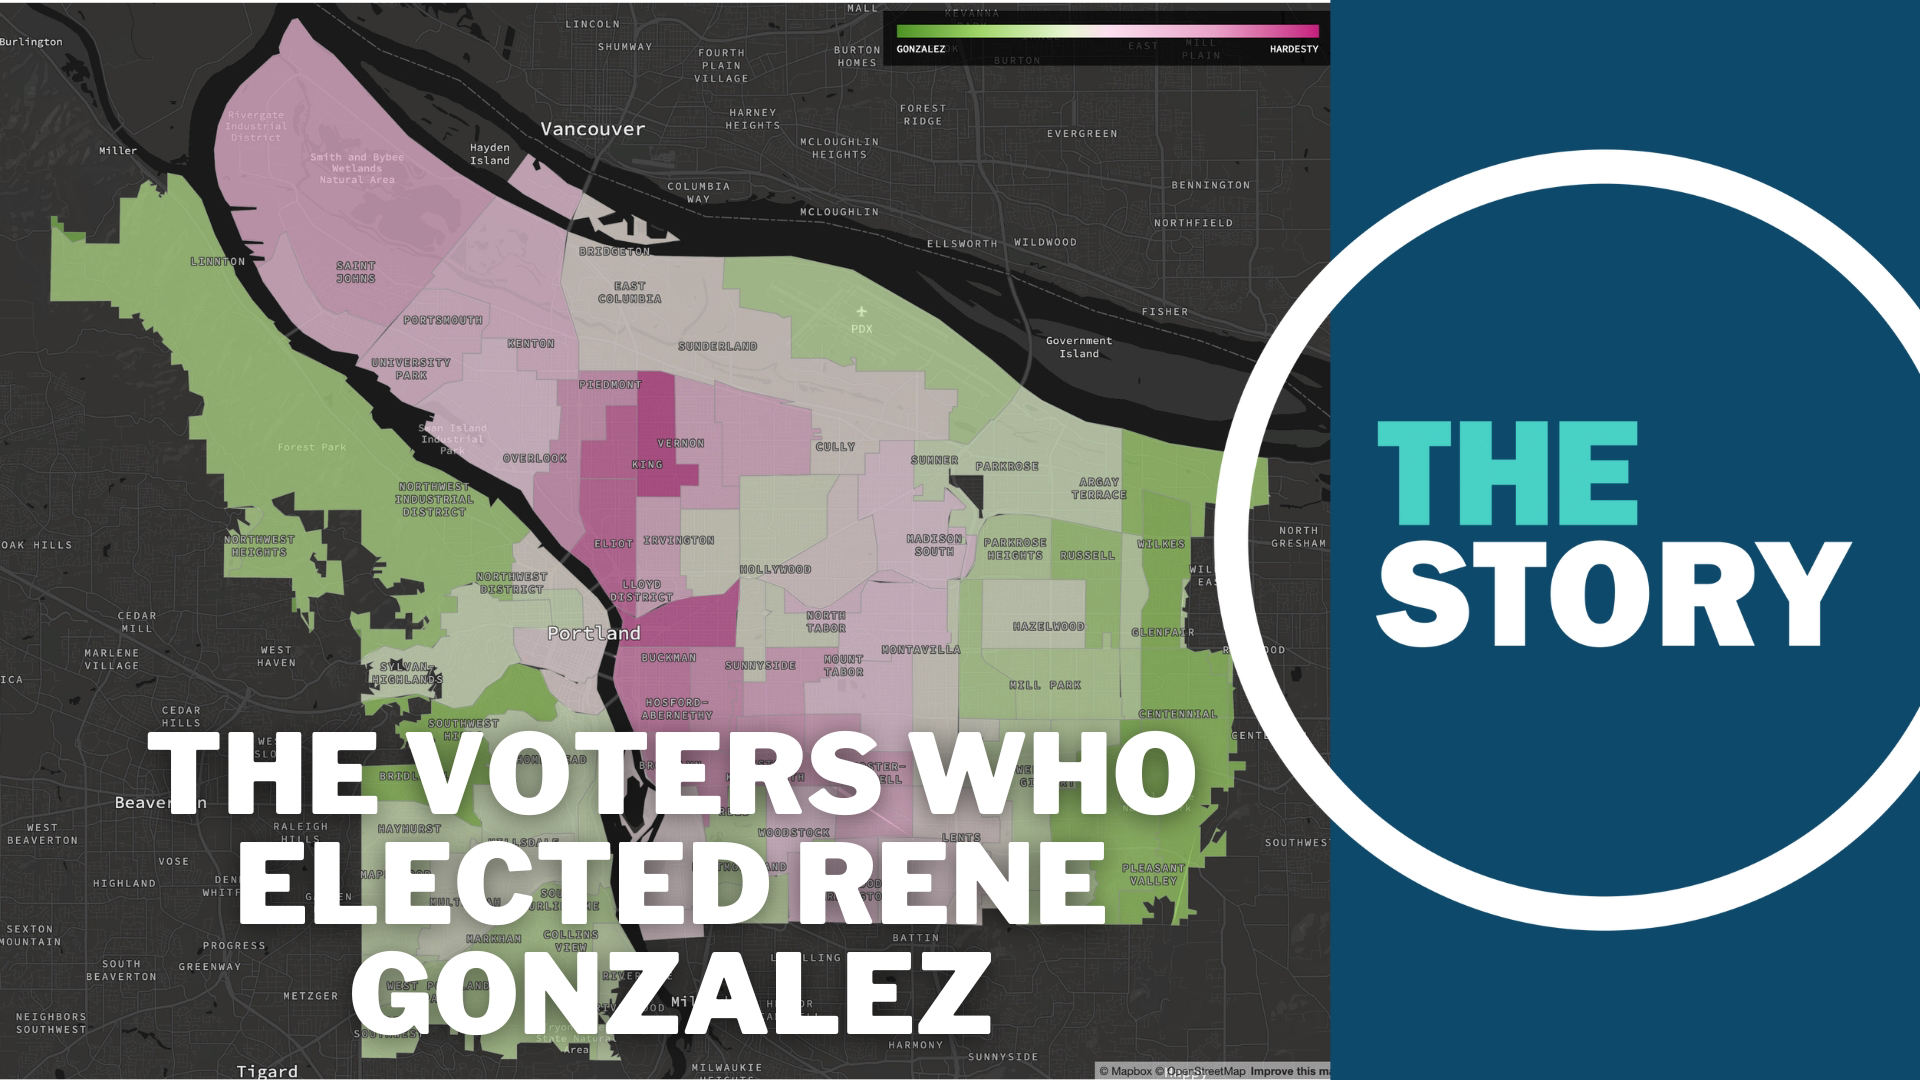 Rene Gonzalez managed to win both the wealthy west side and the more diverse, lower-income neighborhoods of east Portland.